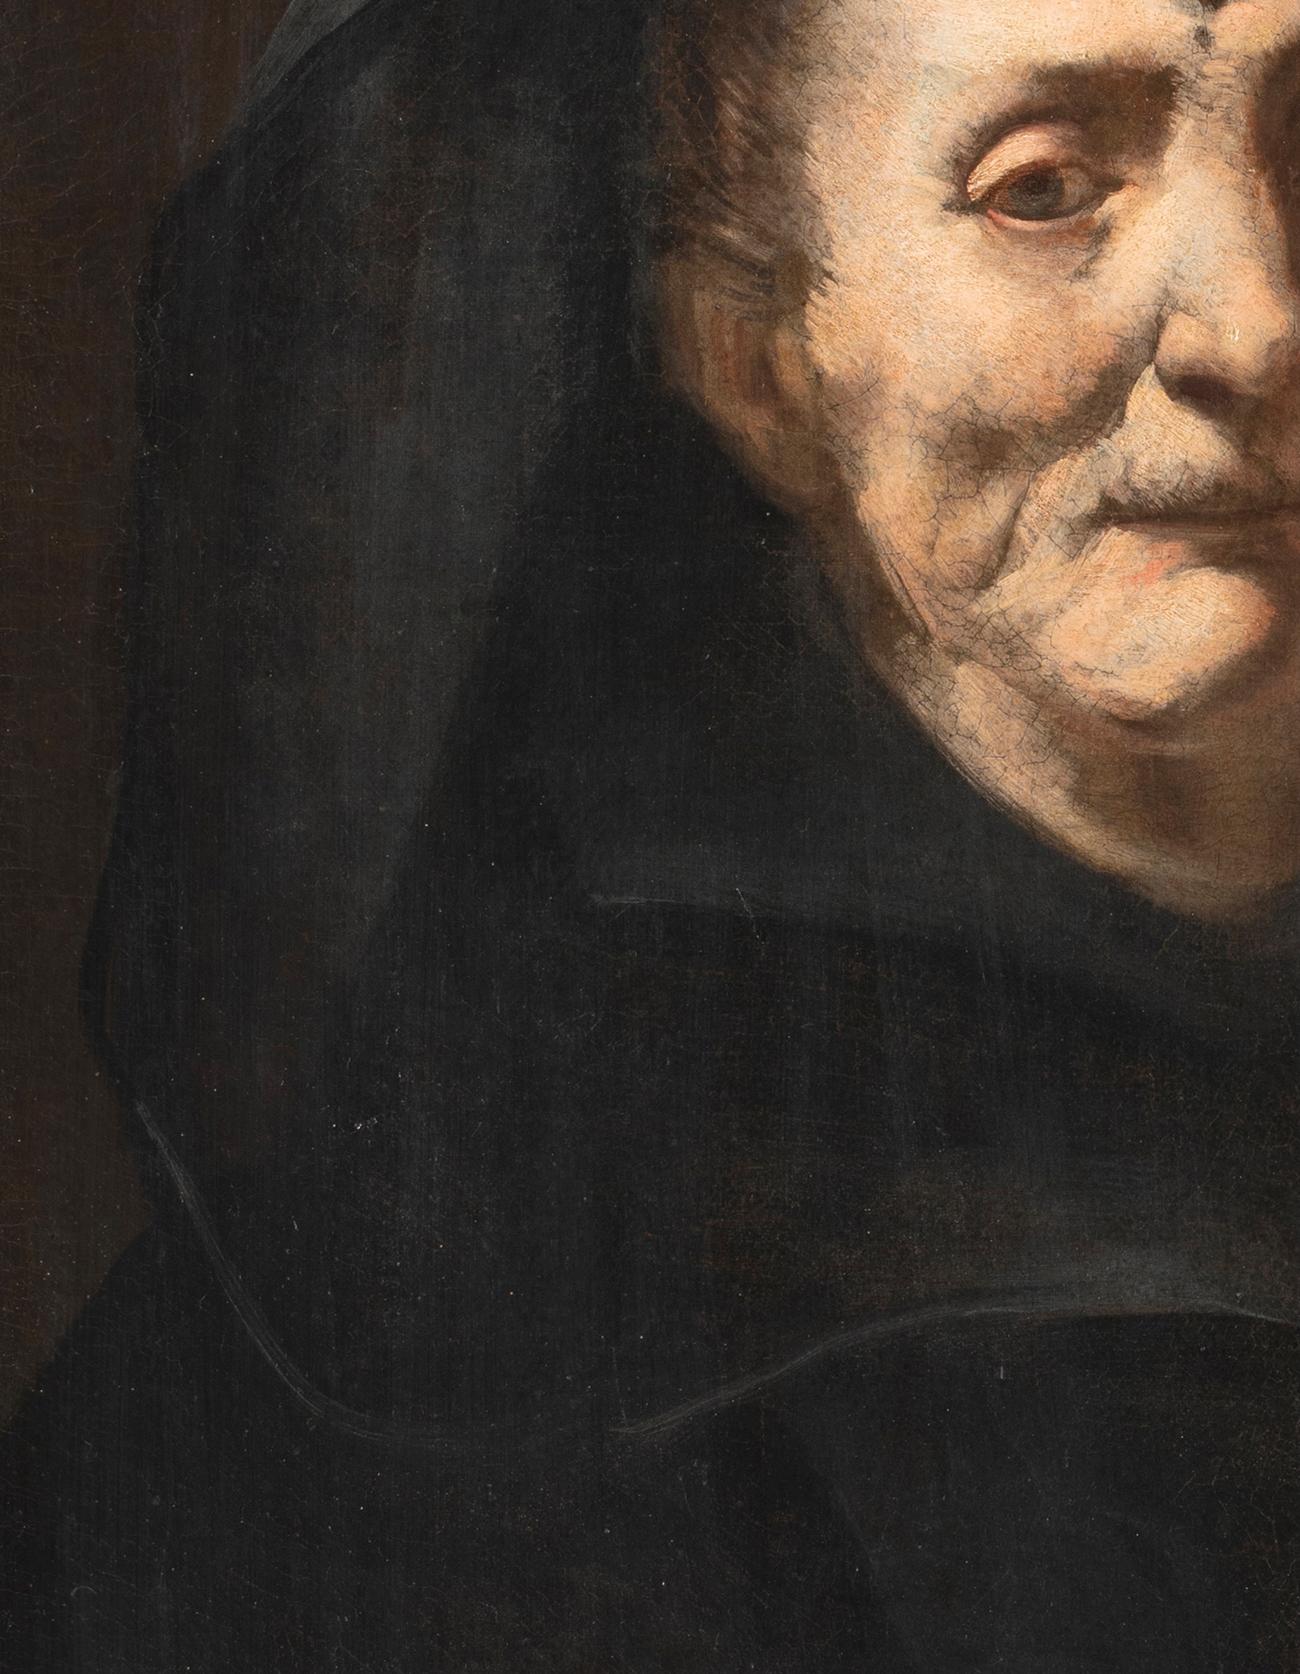 Giuseppe Assereto (Genova - 1626 ca – Genova 1656/57)
Portrait of an elderly woman, possible portrait of Maddalena Massone, wife of Gioacchino Assereto
Oil on canvas, cm. 65,5 x 51,5 – with frame cm. 90 x 77
Gilded, shaped, carved and chased wooden